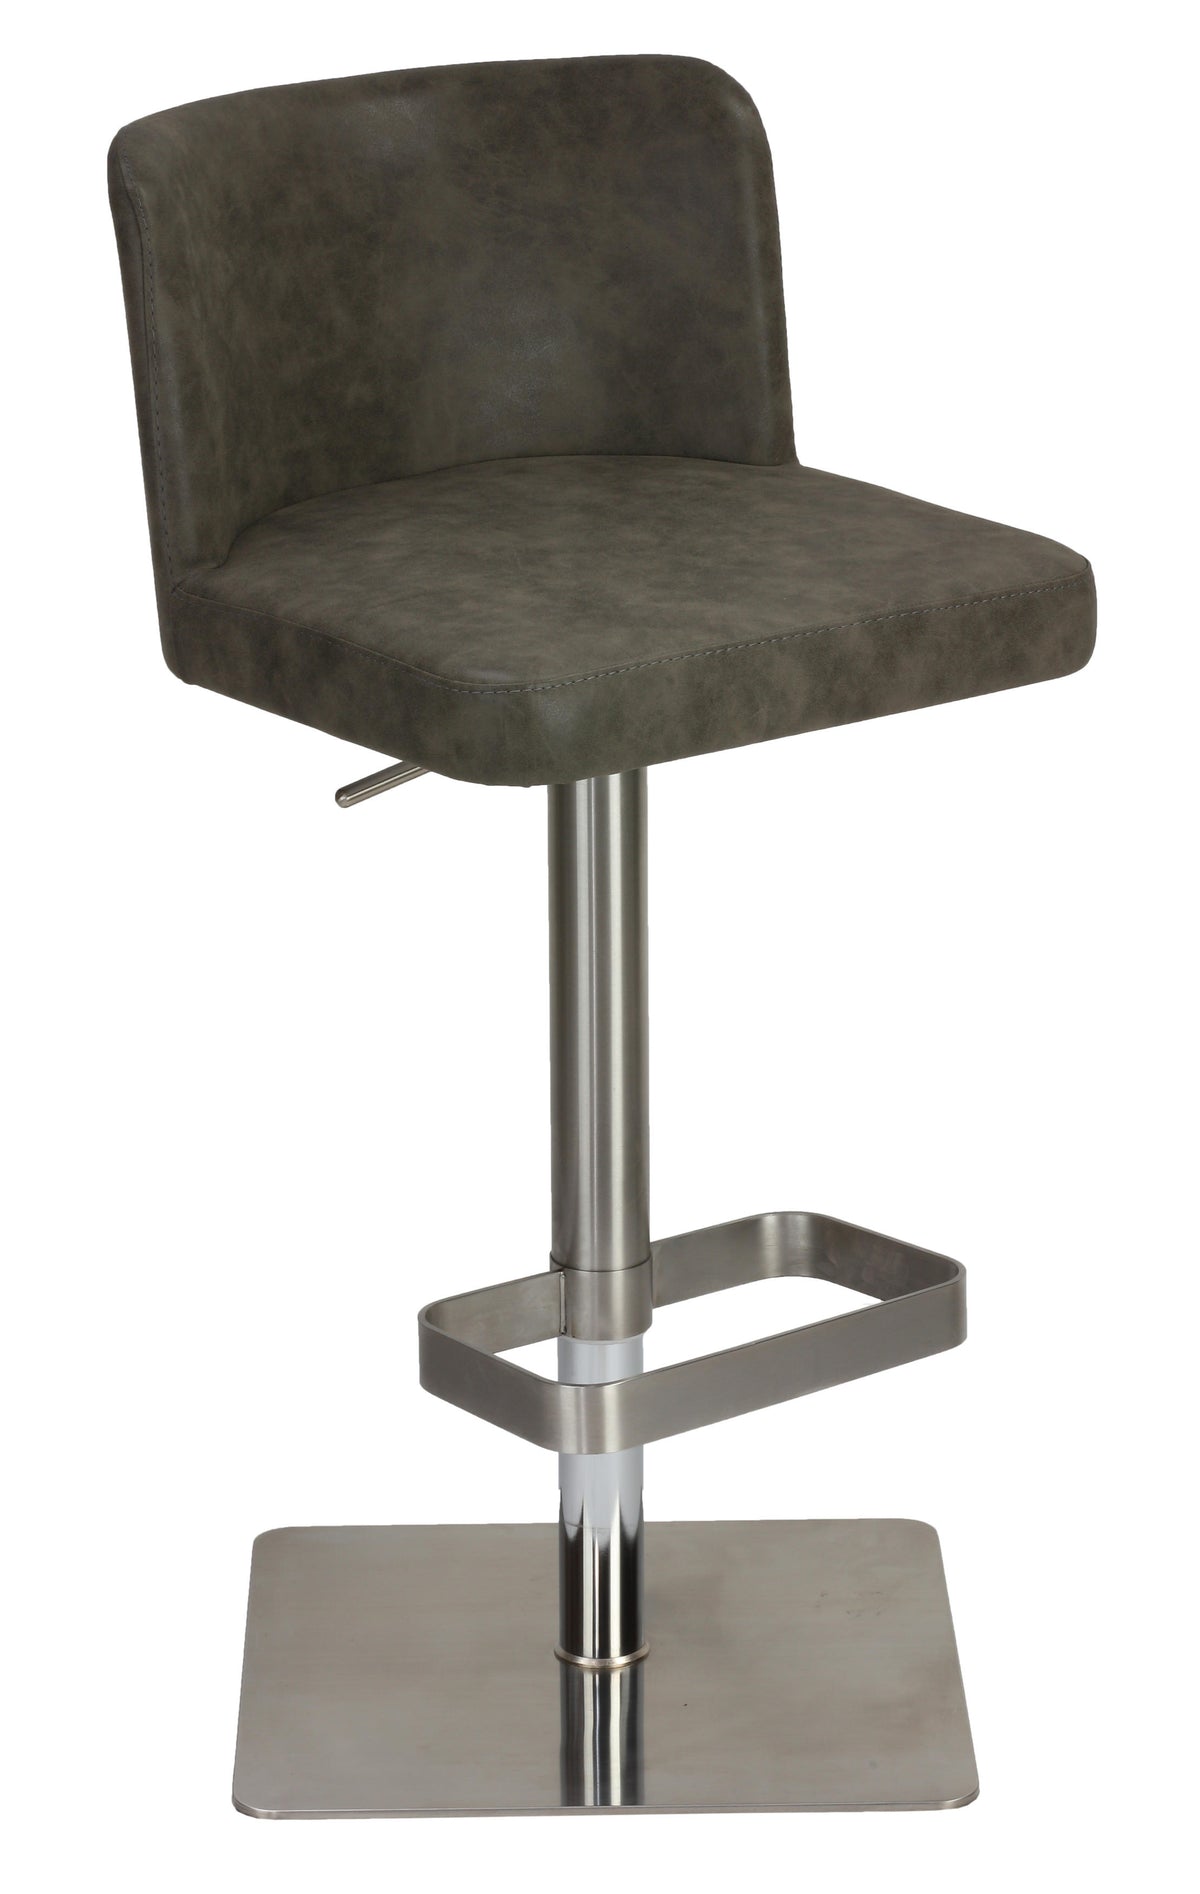 Cortesi Home Hercules Adjustable Swivel Barstool in Brushed Stainless Steel with Heavy Solid Base, Retro Grey